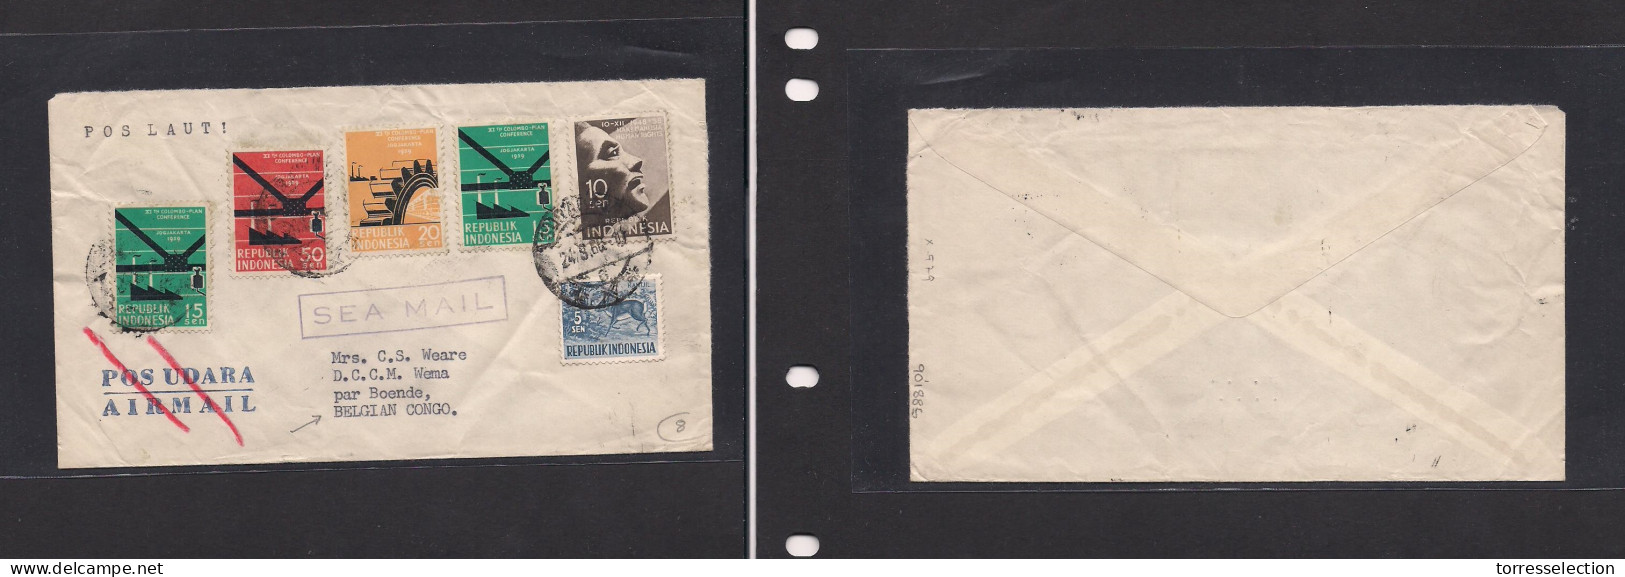 DUTCH INDIES. Dutch Indies - Cover - Indonesia 1960 Sea Mail Mult Fkd Env Fauna+industry, Fine. Easy Deal. XSALE. - Netherlands Indies